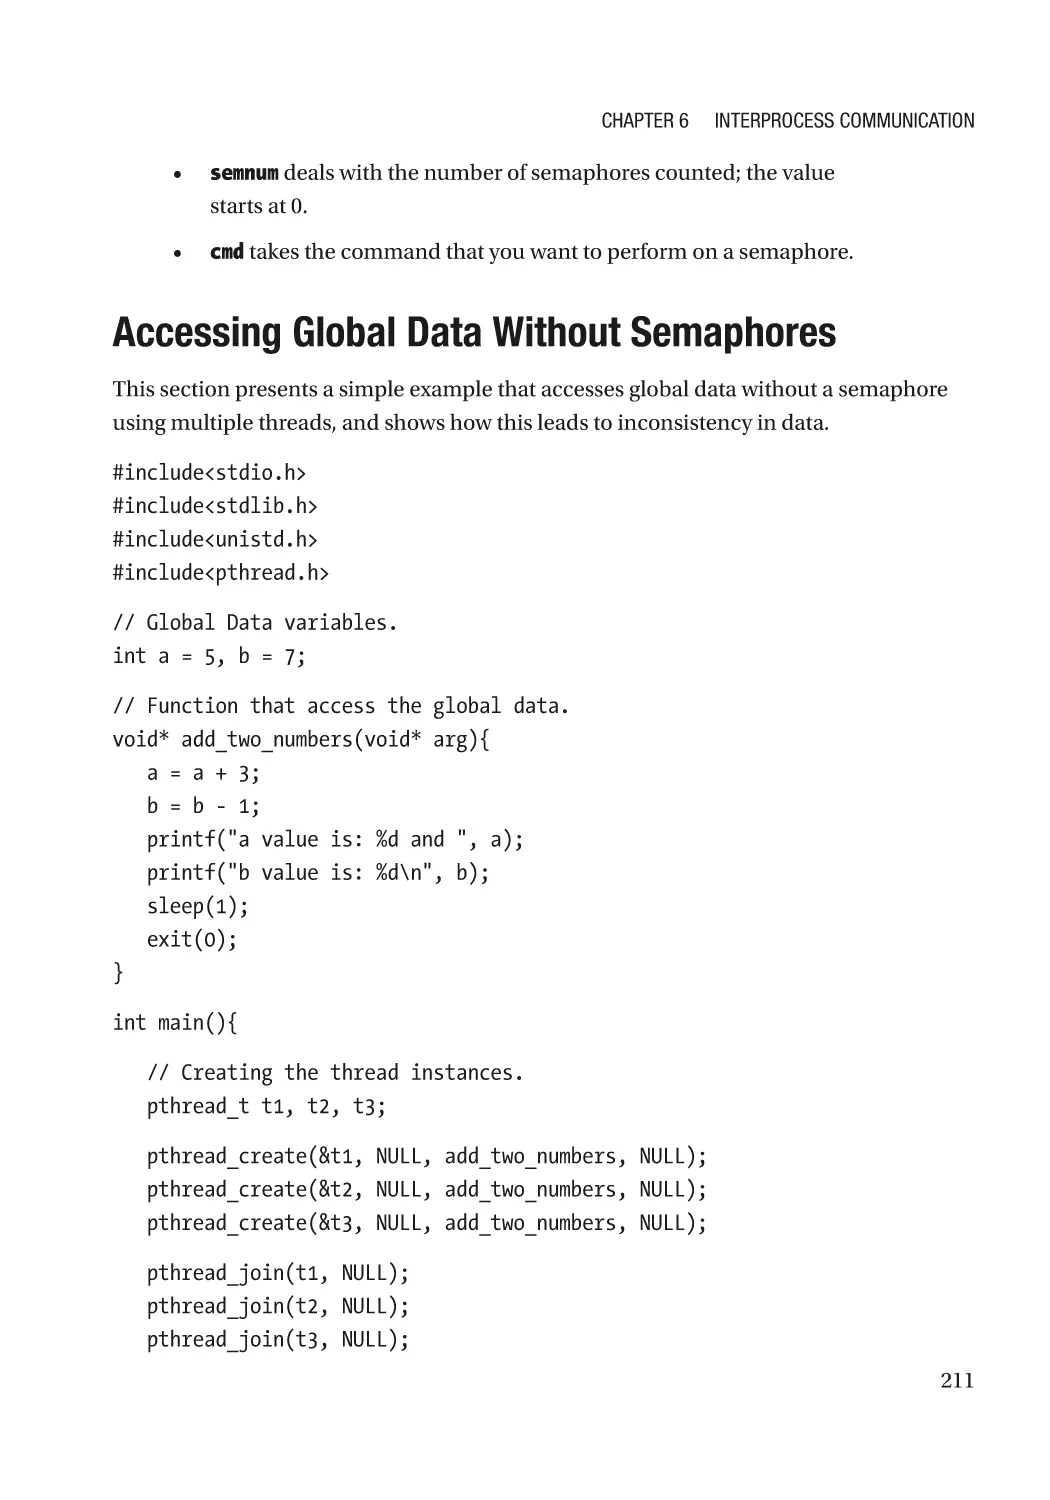 Accessing Global Data Without Semaphores